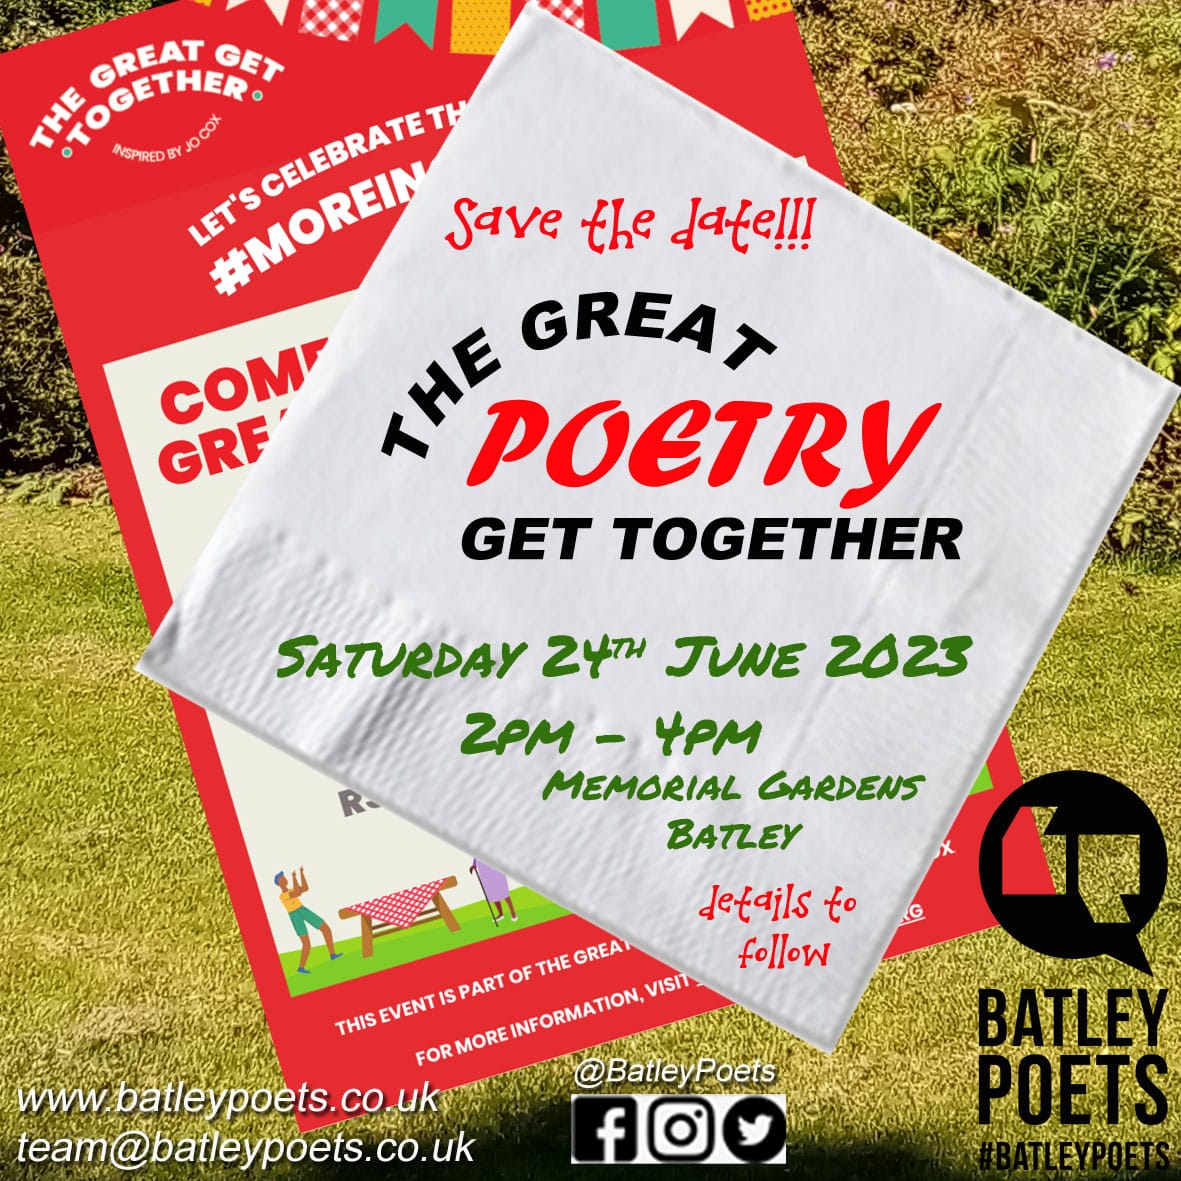 Save the date! Join us for The Great Poetry Get Together on Saturday 24th June from 2-4 PM in Batley #GreatGetTogether